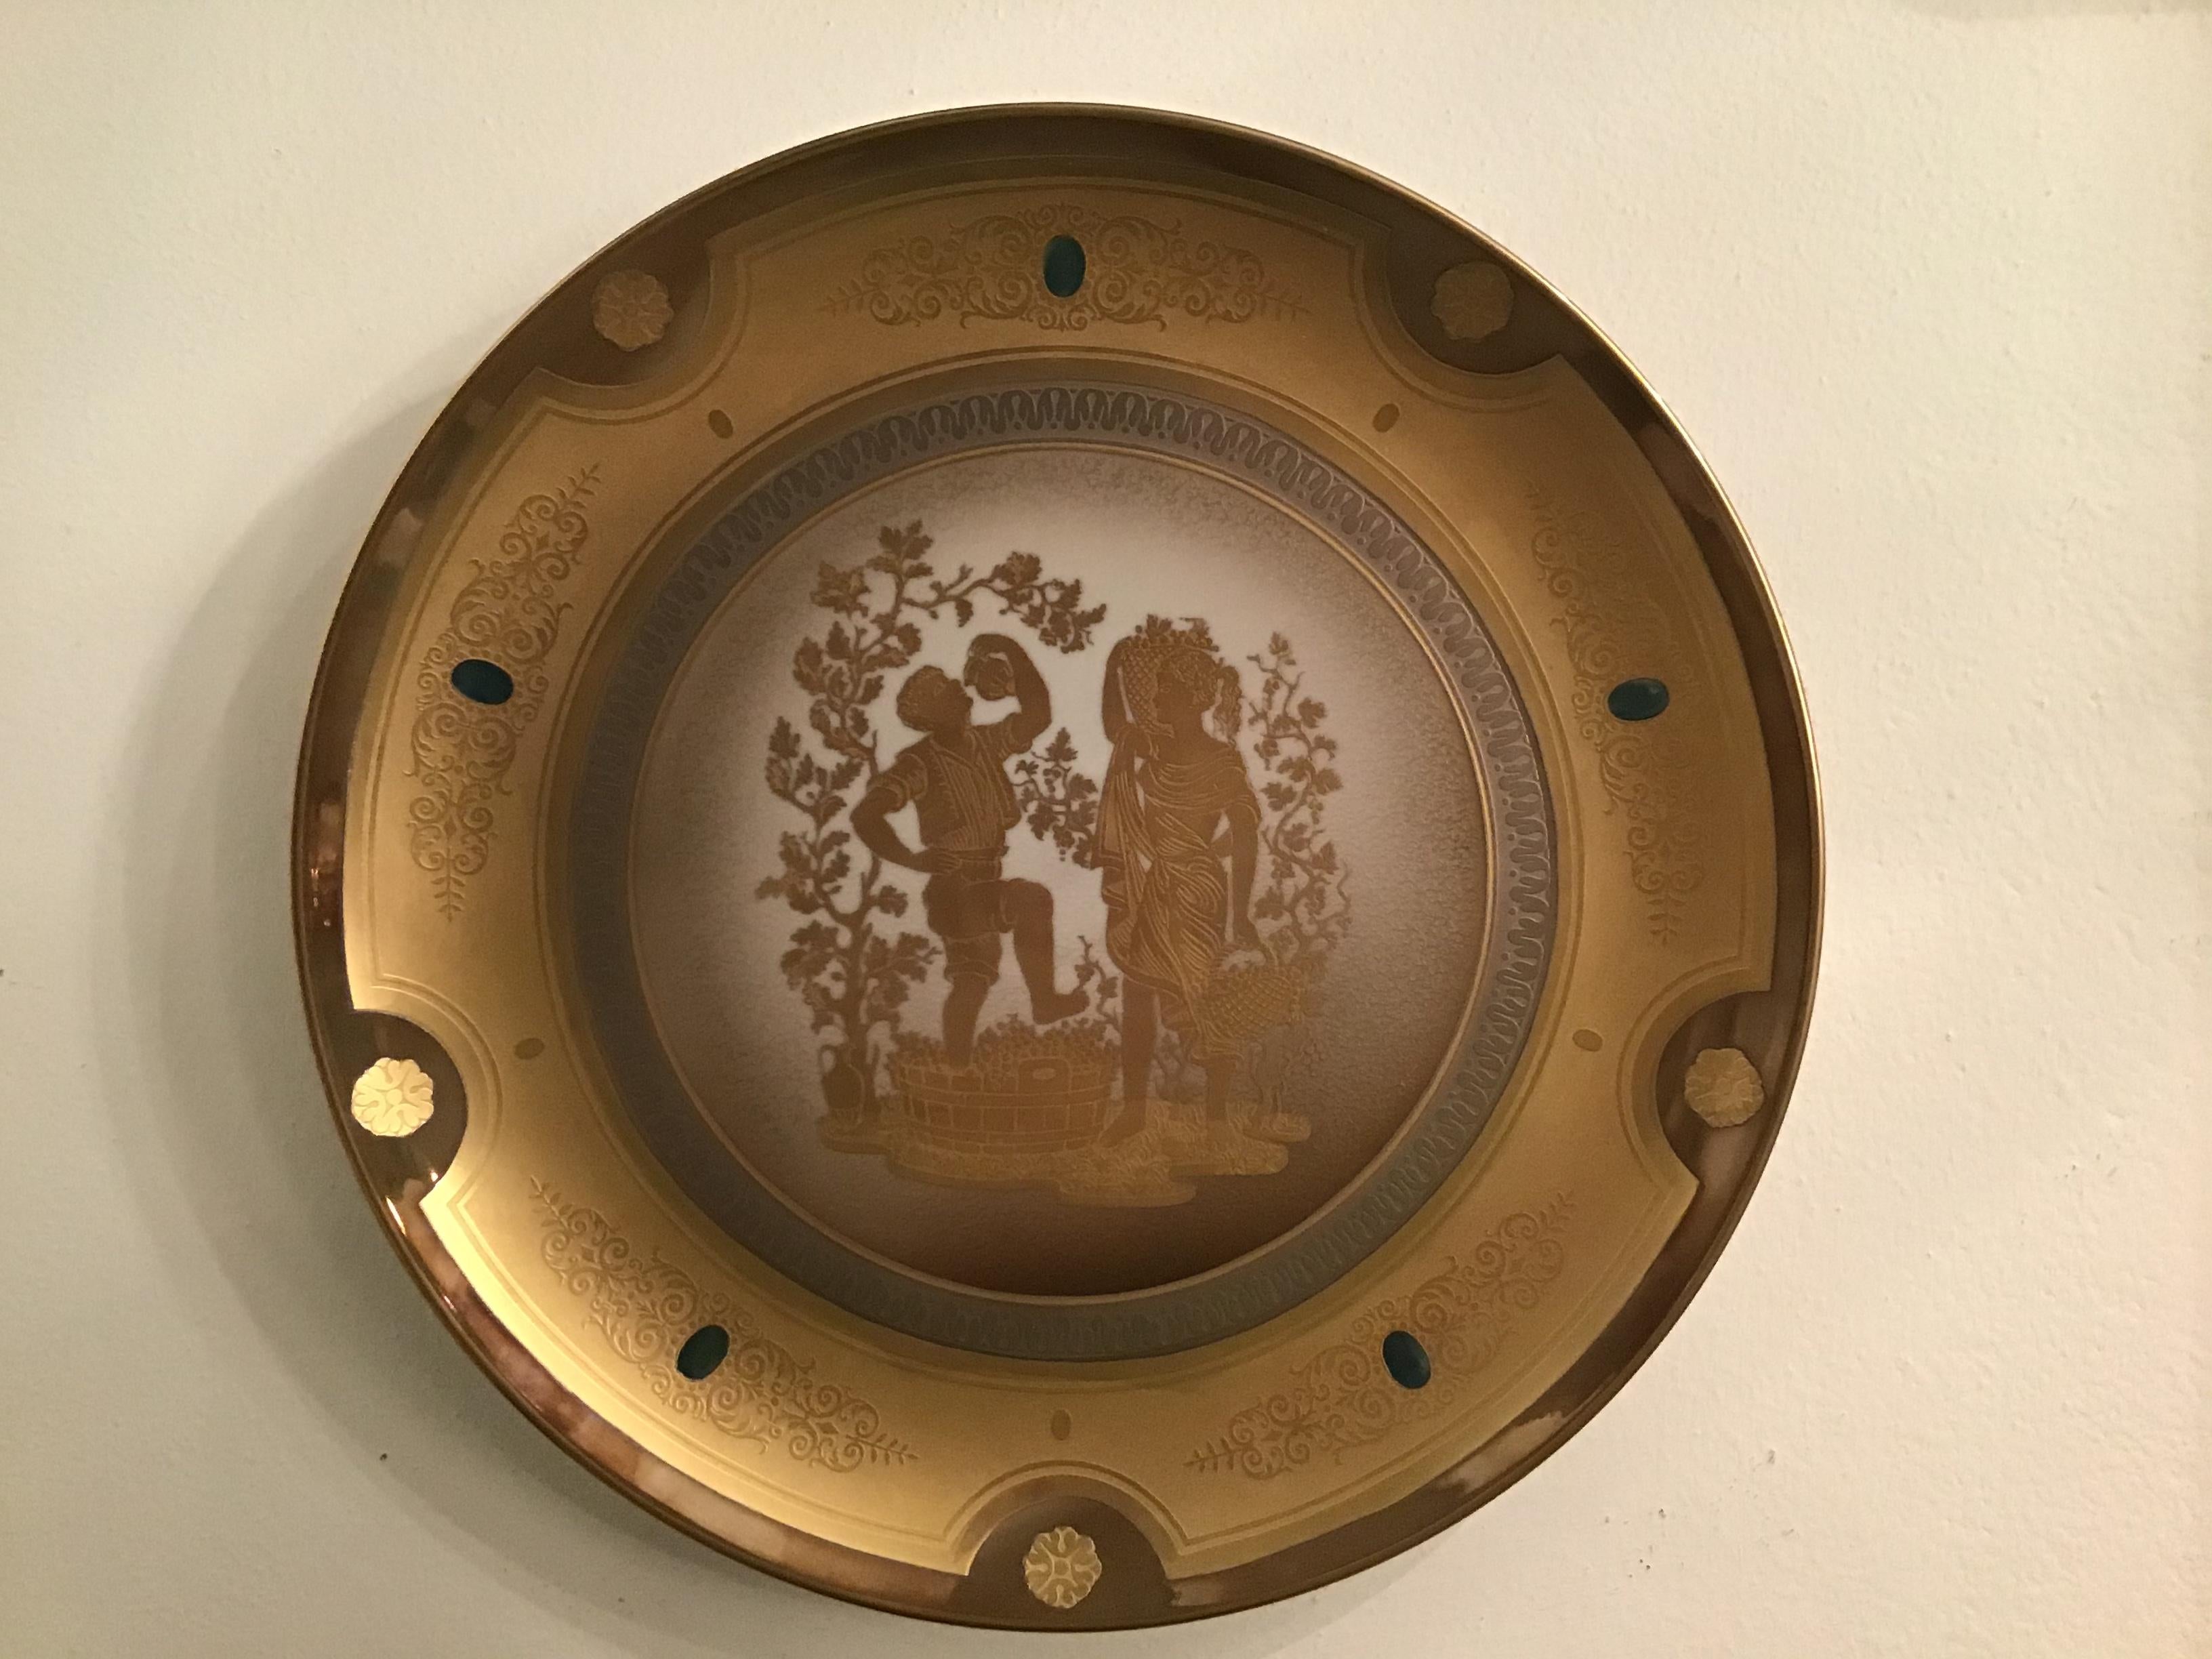 Morbelli Porcelain Wall Plate Gold “ Autunno”, 1960, Italy In Excellent Condition For Sale In Milano, IT